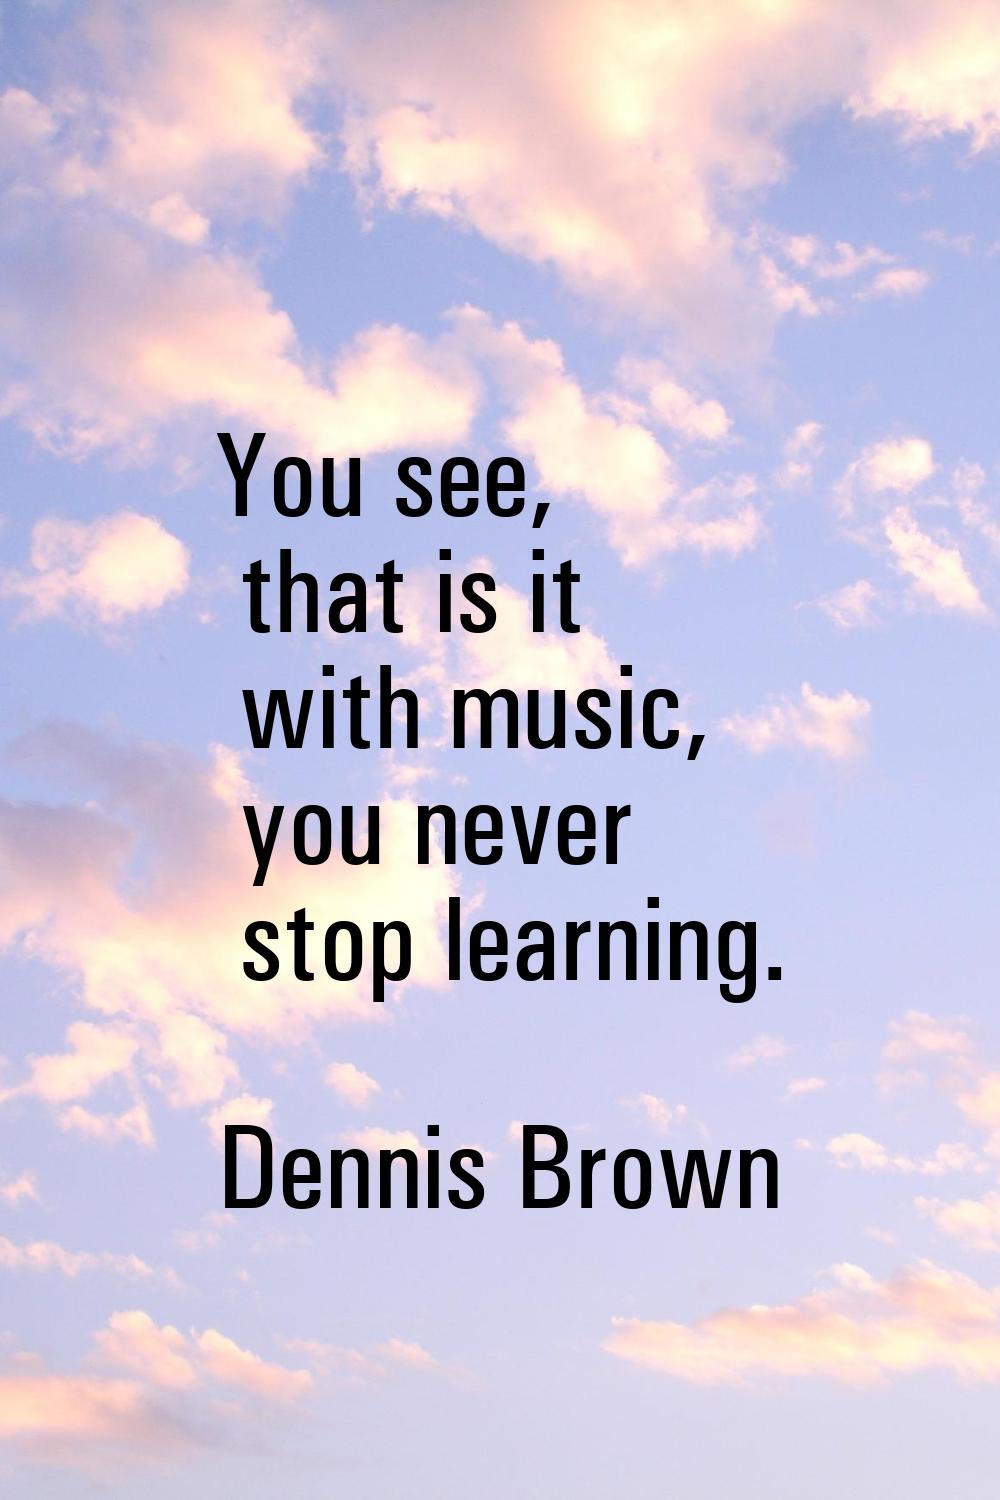 You see, that is it with music, you never stop learning.